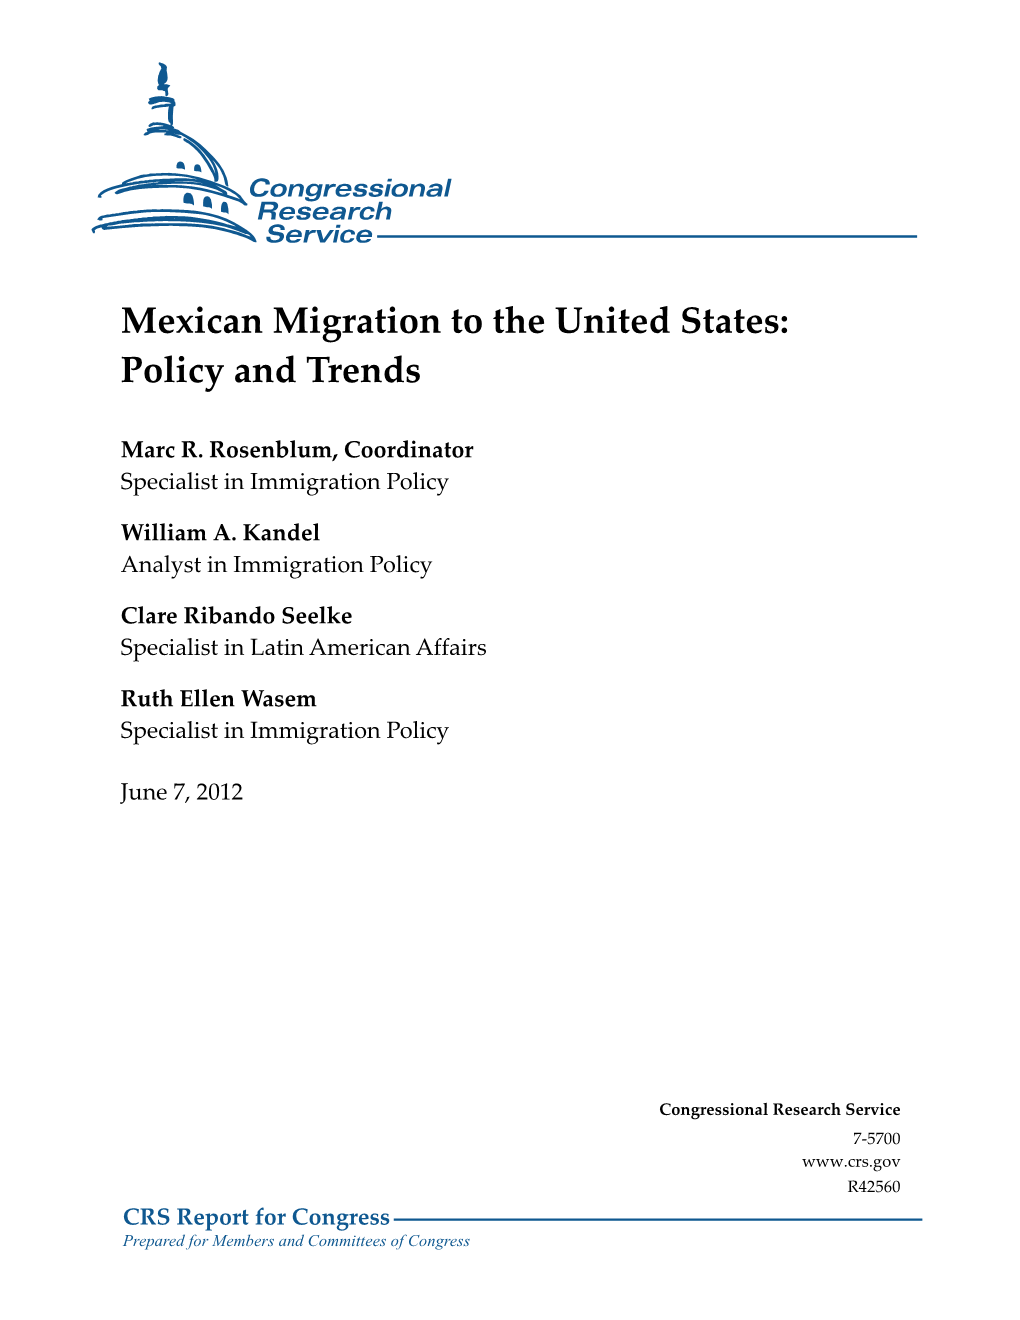 Mexican Migration to the United States: Policy and Trends